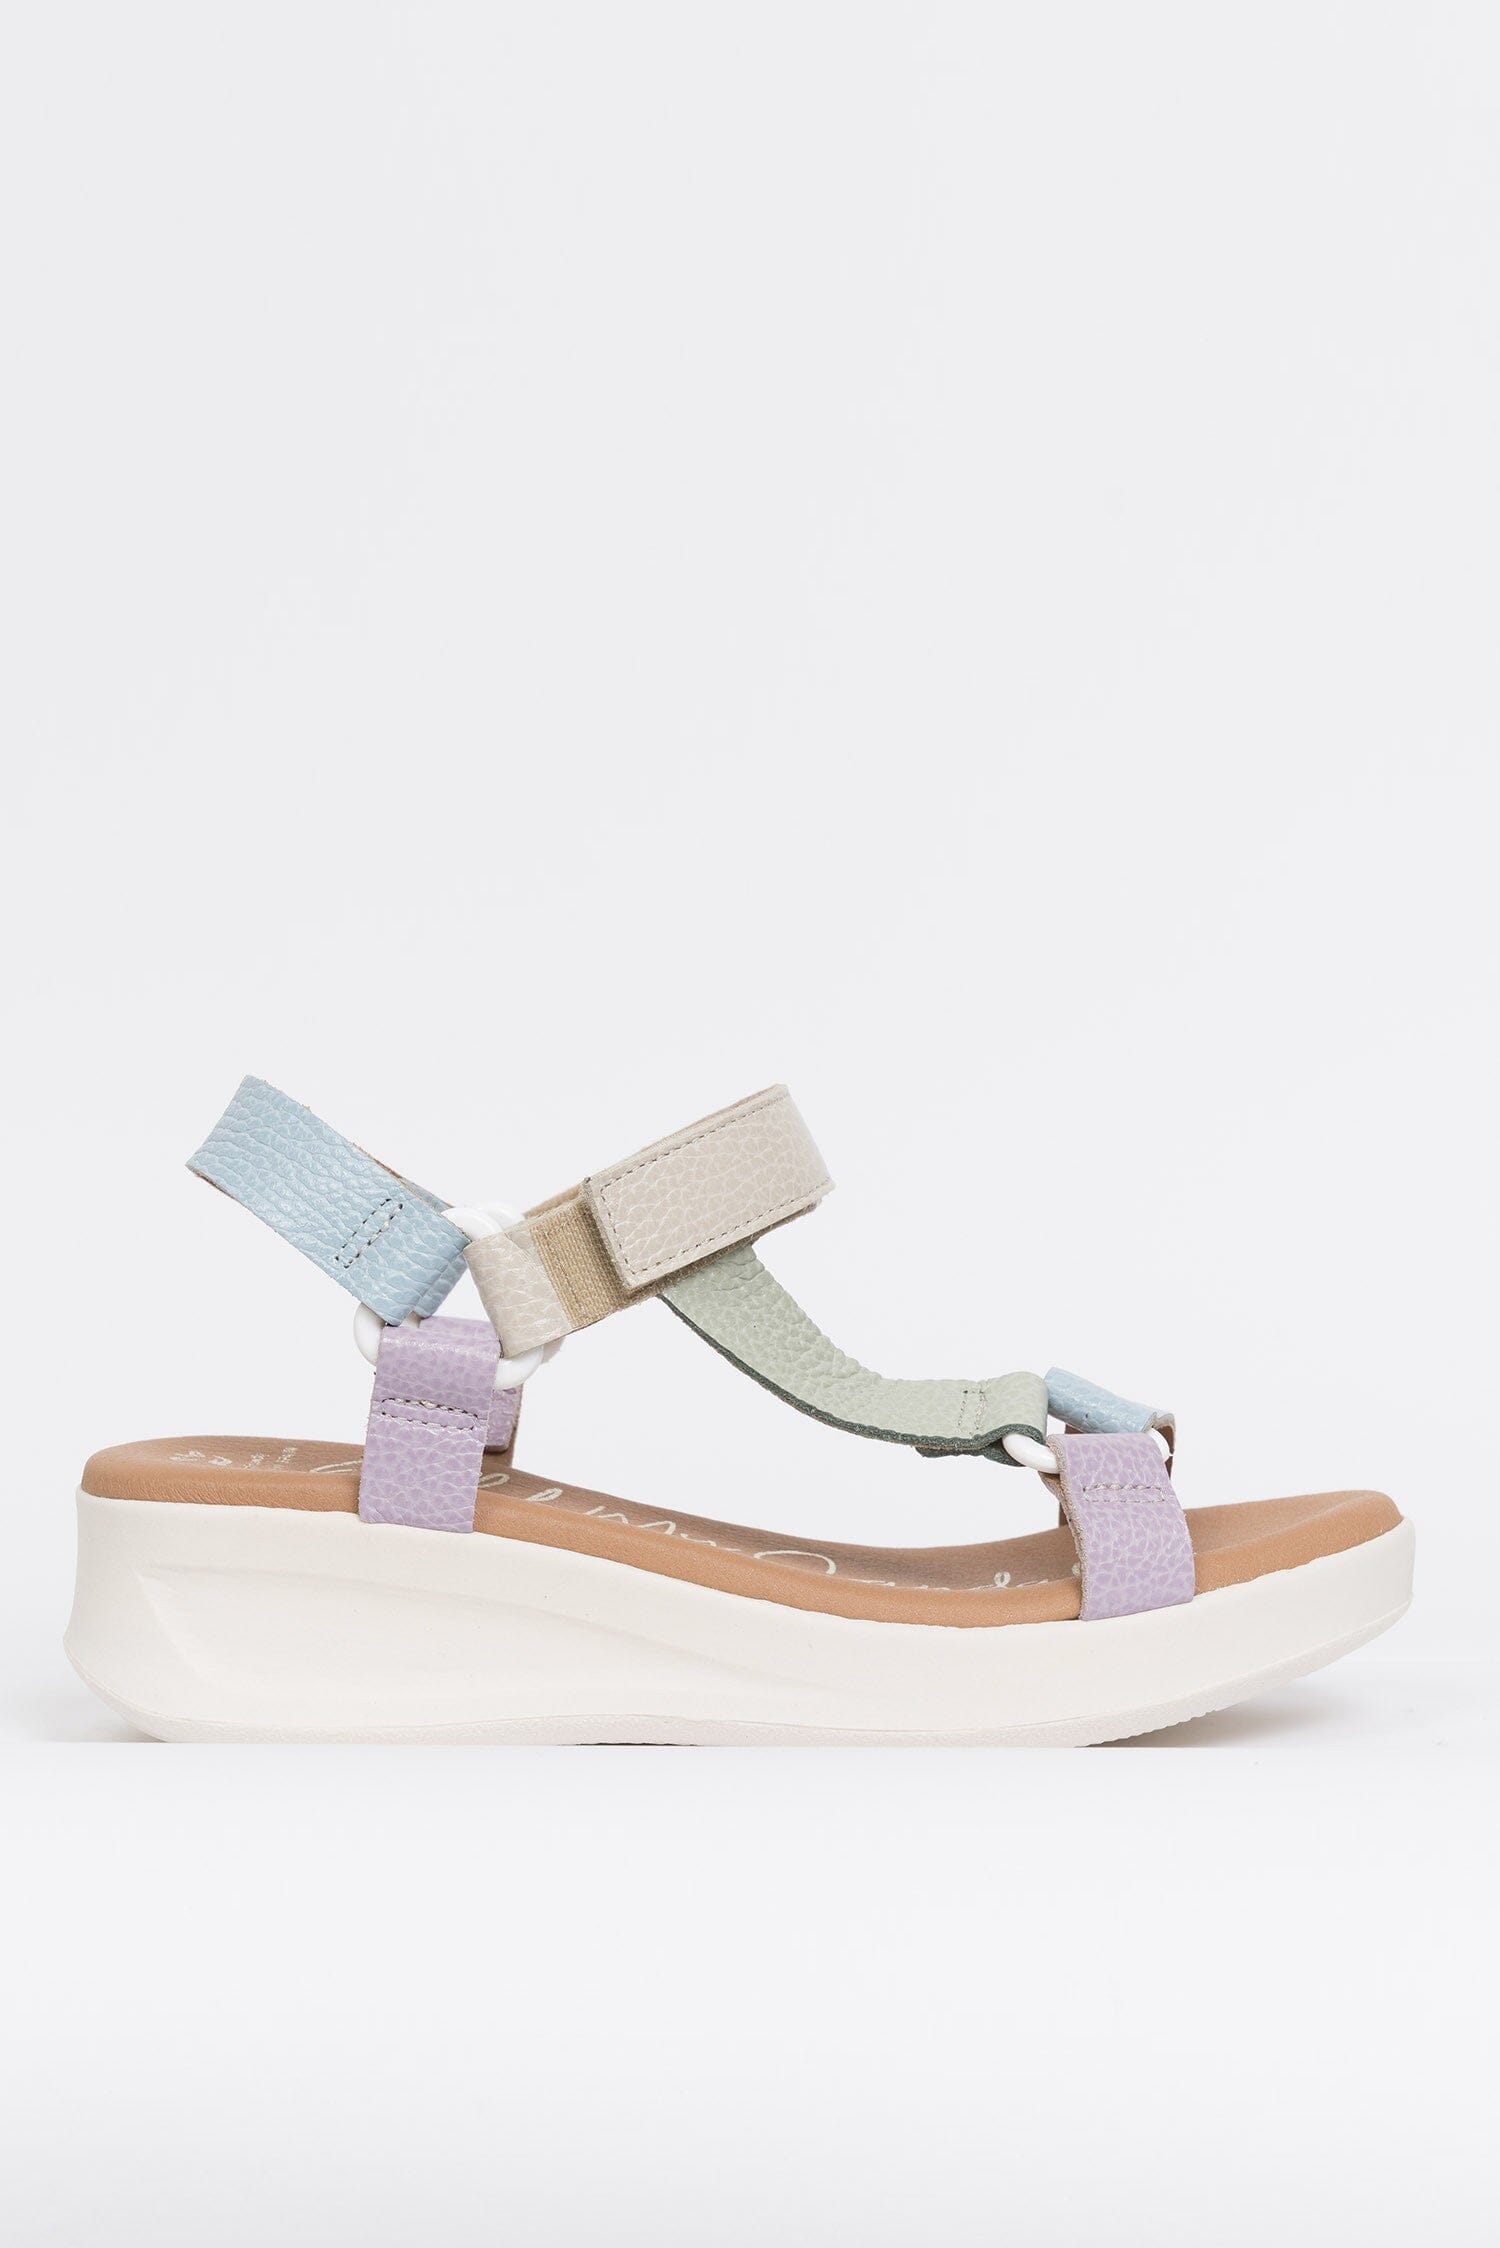 5186 Spanish leather Sport delux sandals/wedge with velcro in Pastel colour sandals Sam Star Shoes 